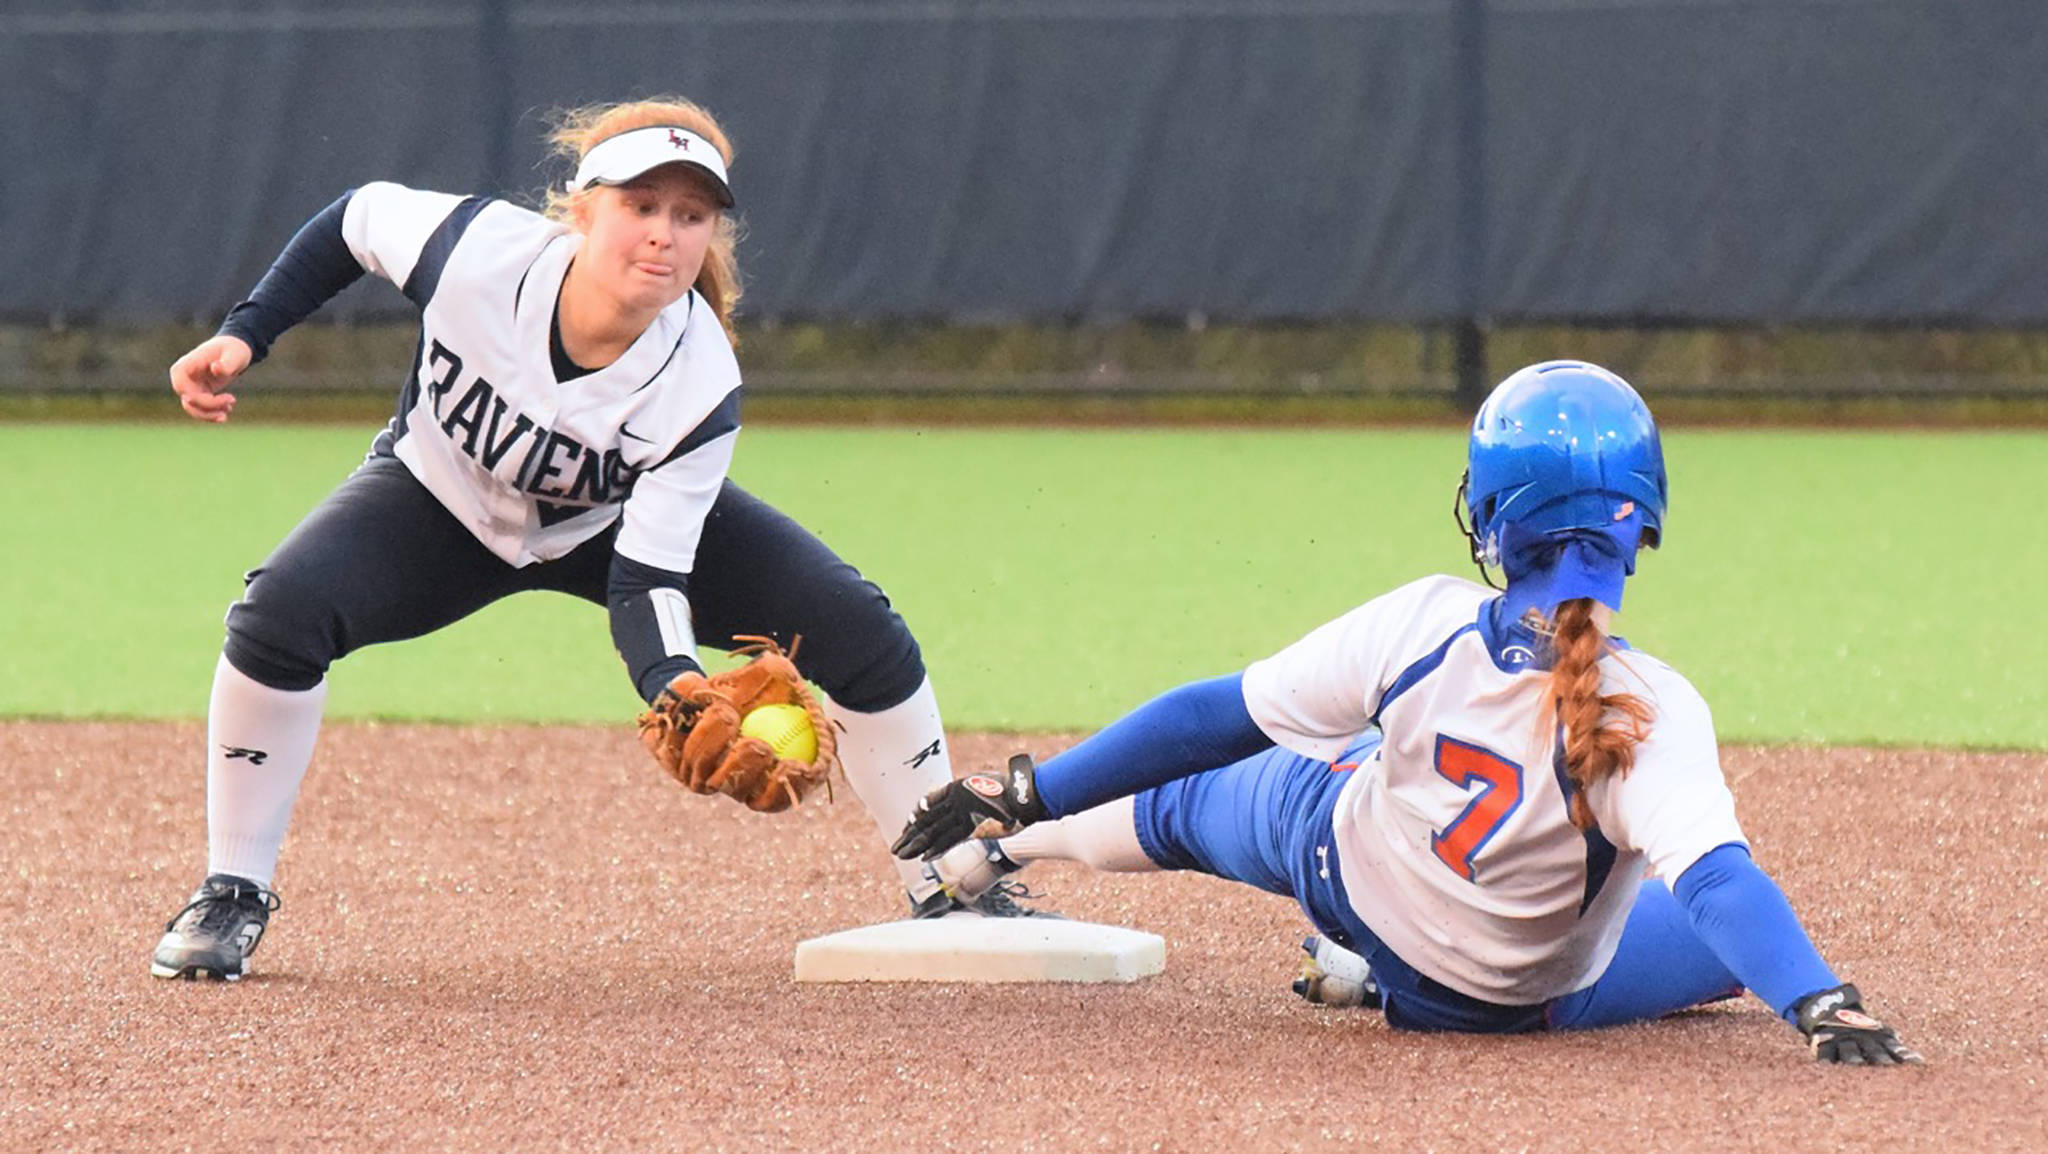 Auburn Mountainview’s Lily Hope slides safely into second base as Auburn Riverside’s Brooke Dye fields the ball during NPSL Olympic Division play Monday. RACHEL CIAMPI, Auburn Reporter